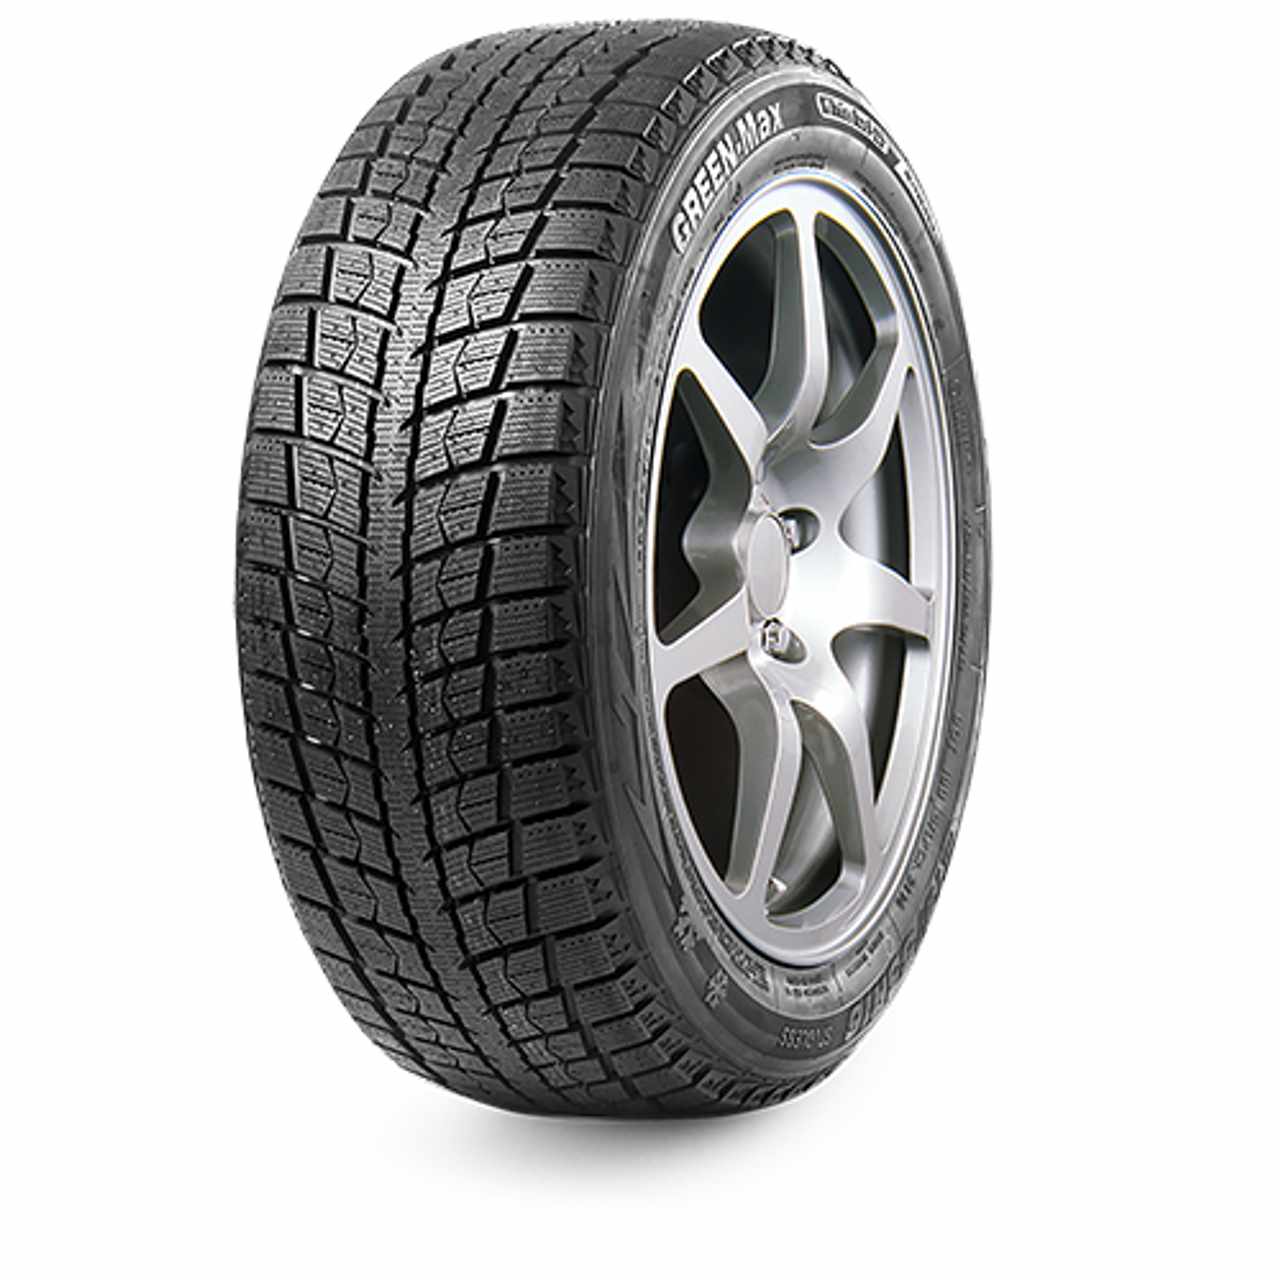 LINGLONG GREEN-MAX WINTER ICE I-15 SUV 275/55R19 111T NORDIC COMPOUND MFS BSW von LINGLONG